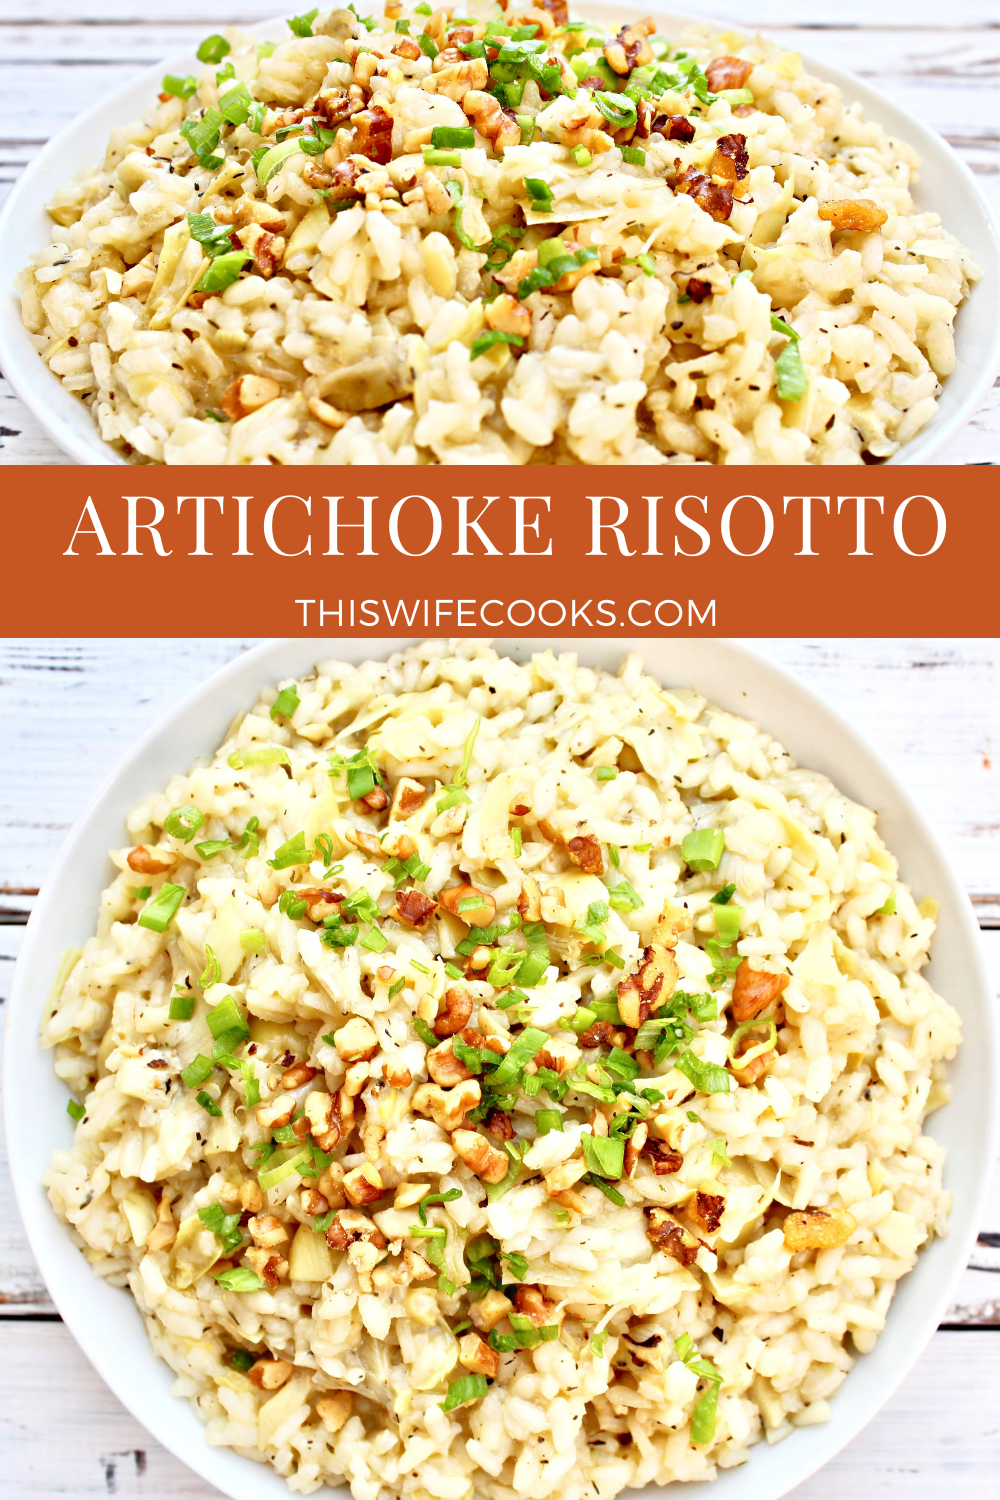 Artichoke Risotto ~ This classic Italian comfort food is very easy to make and a great company-worthy dish. via @thiswifecooks